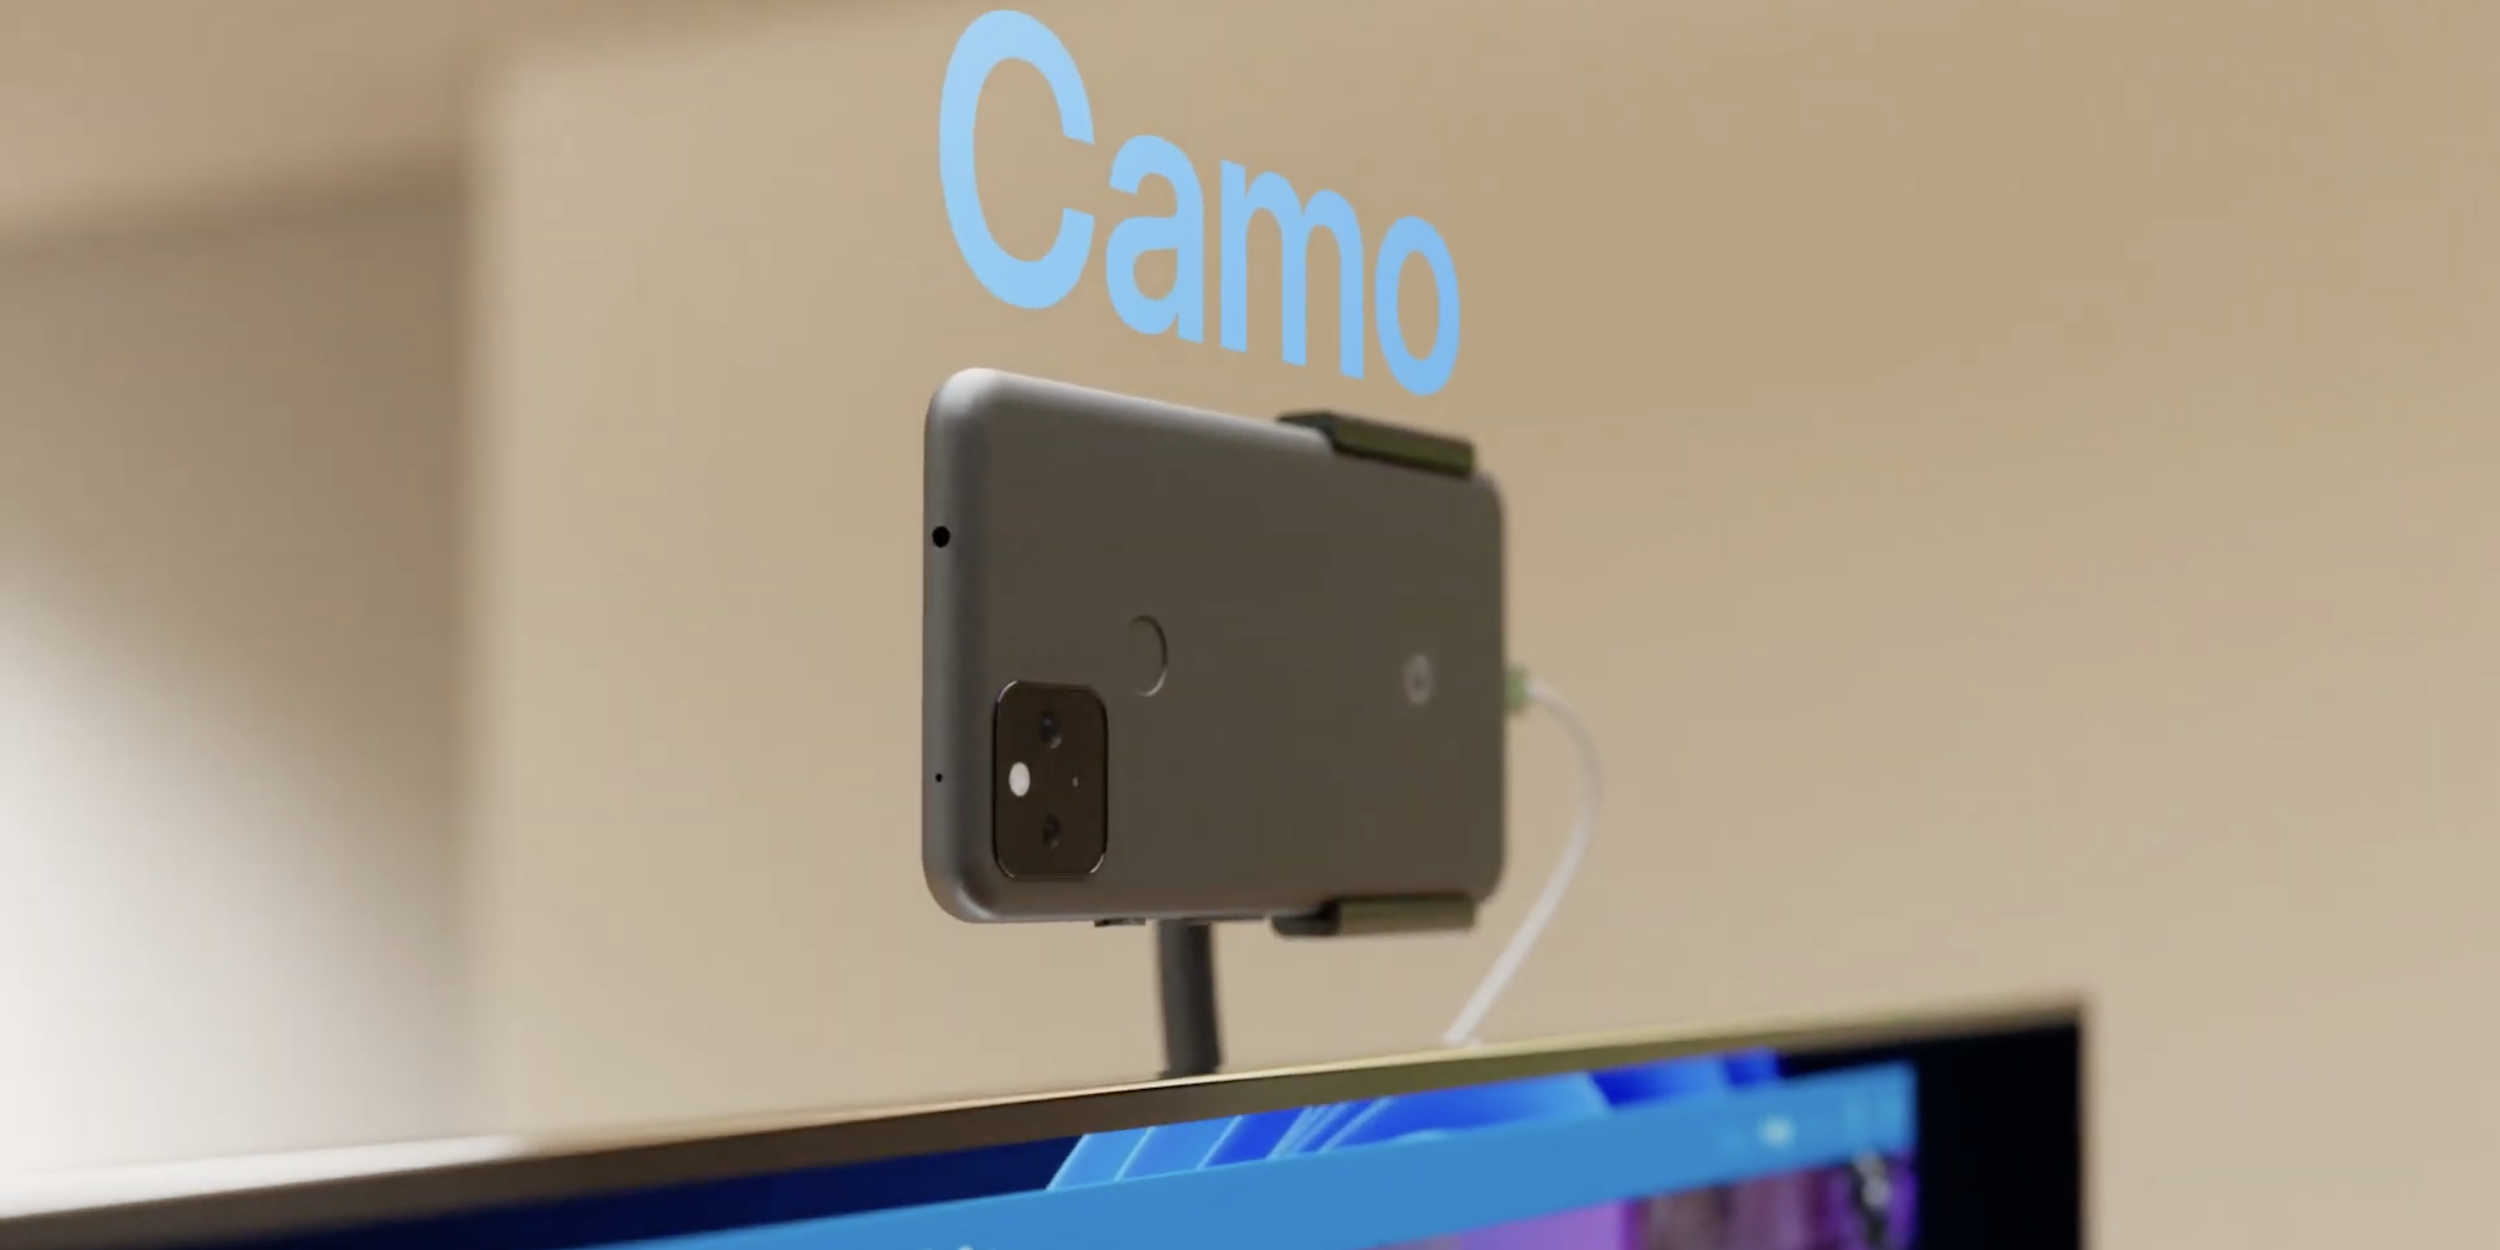 Camo' for Android turns phone into a PC -